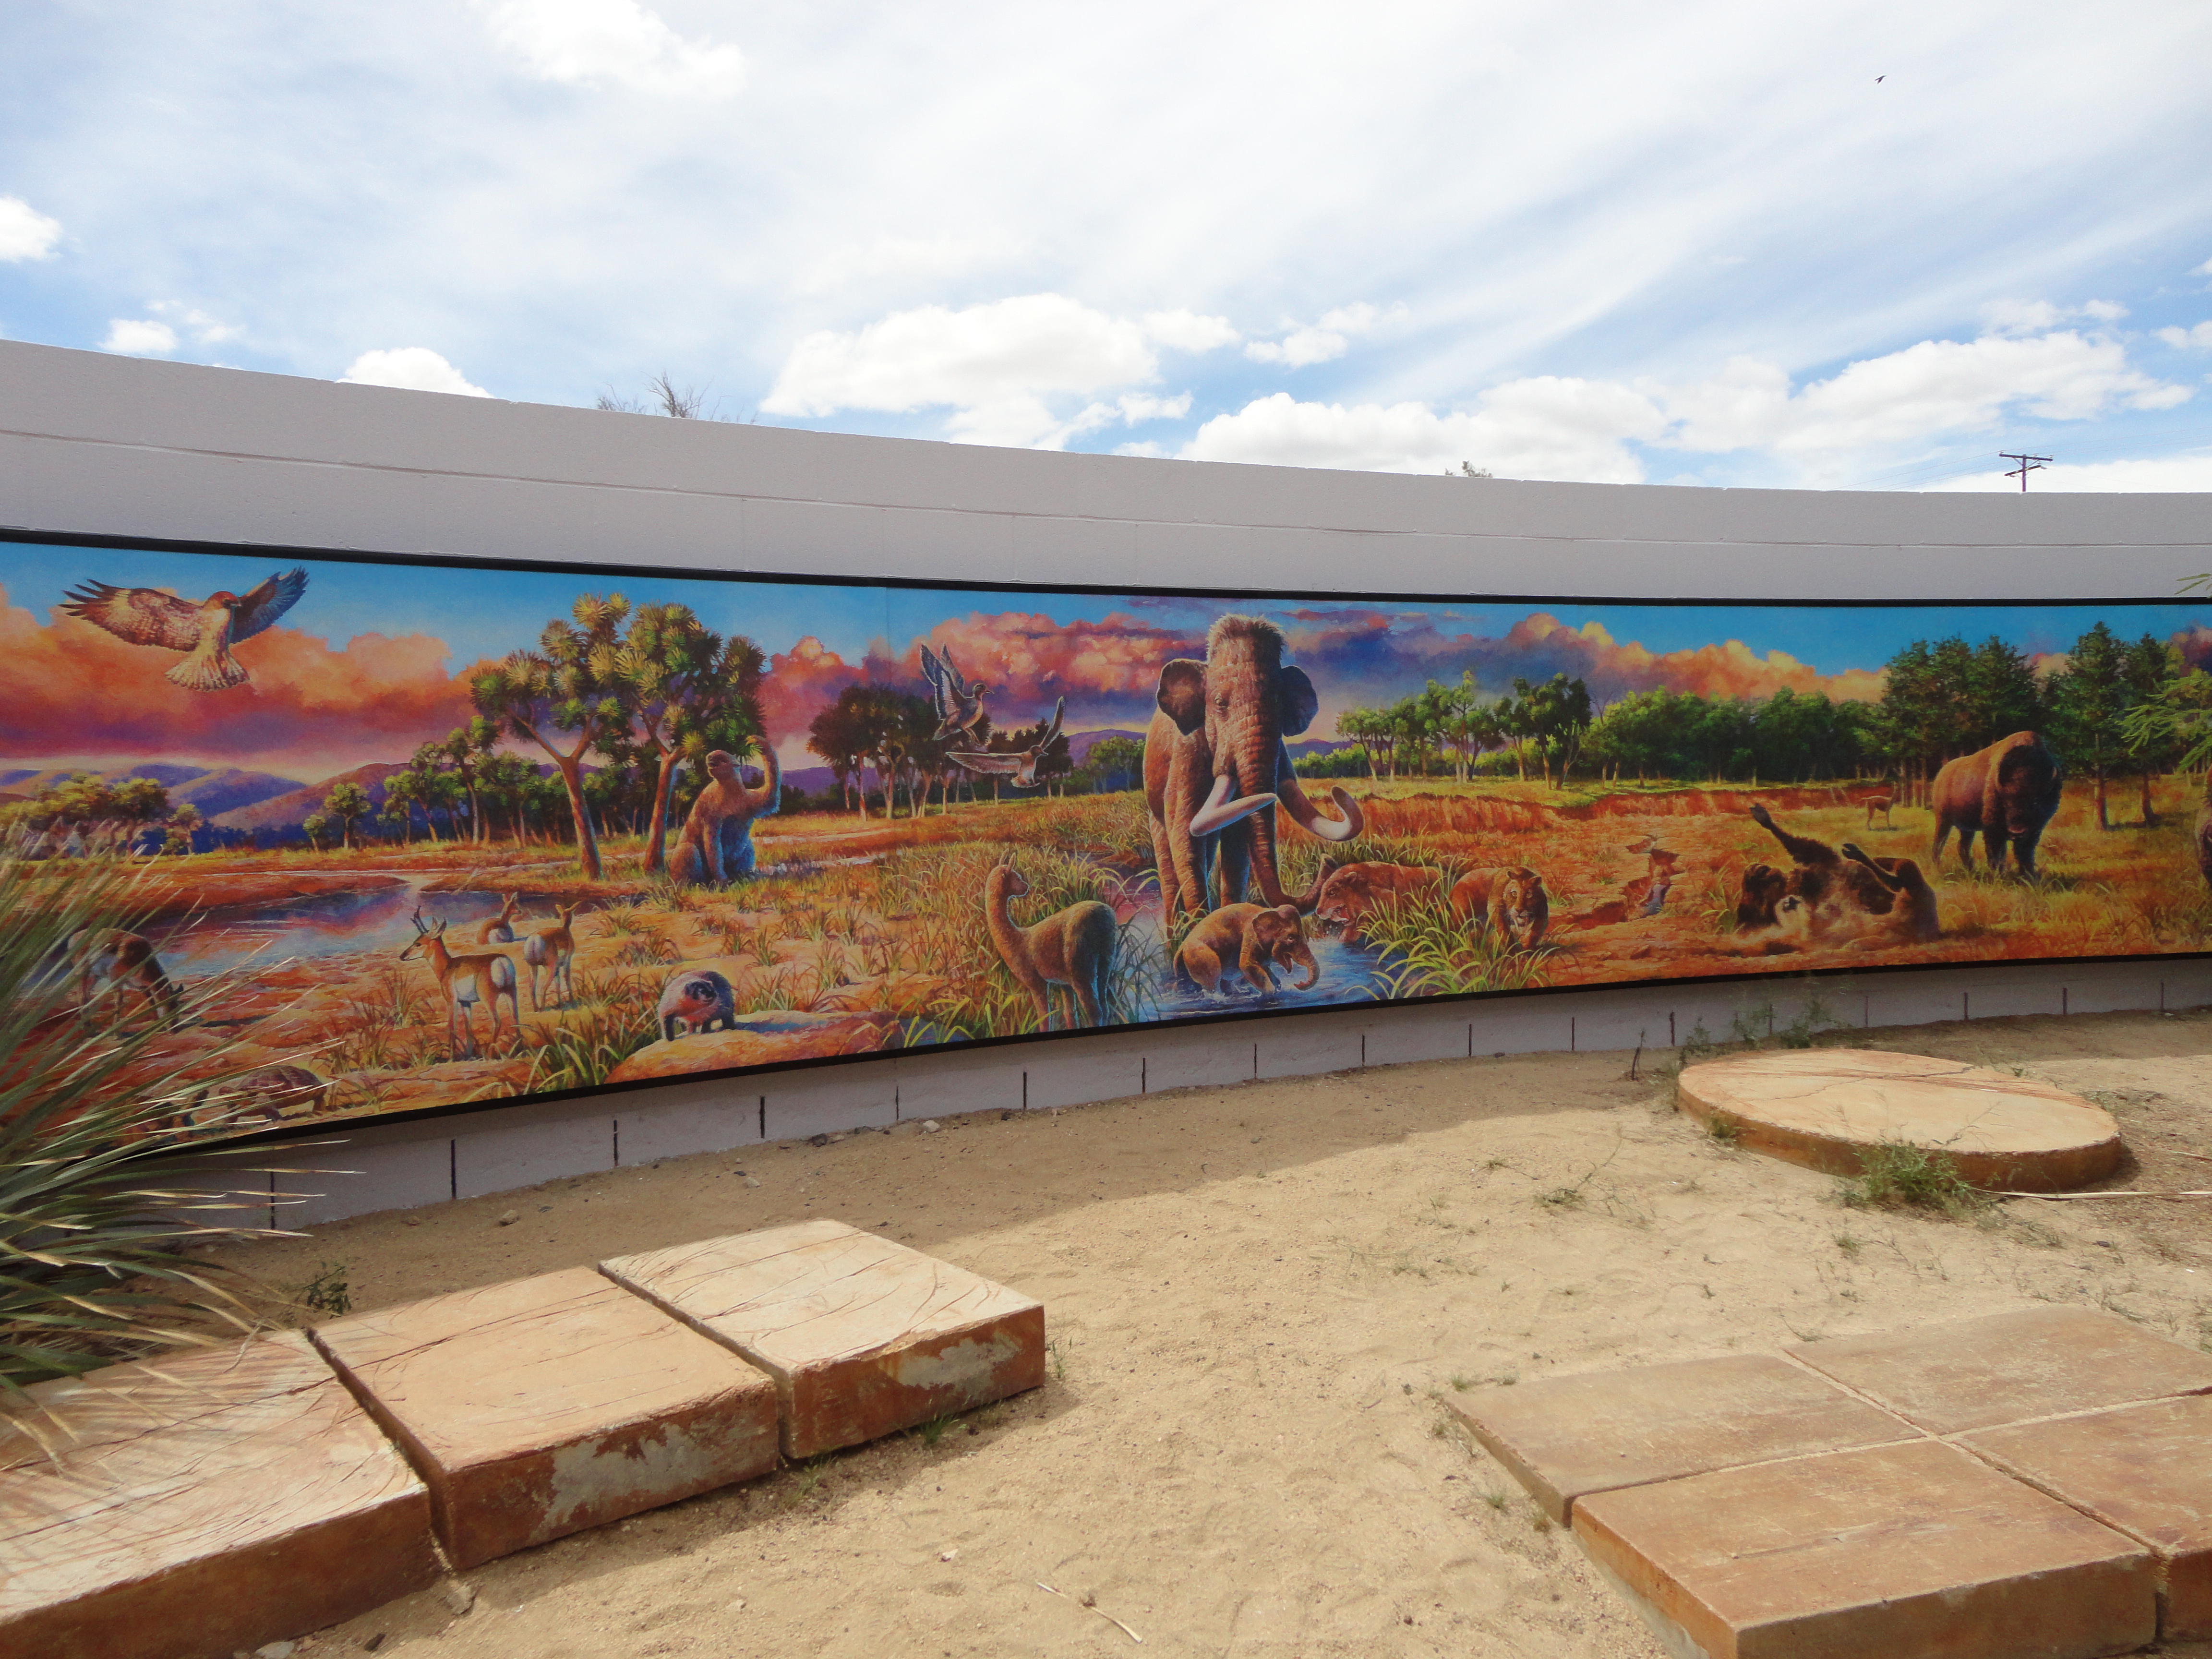 A mural illustrating Ice Age animals of Joshua Tree National Park including mammoth, ground sloth, saber-toothed cats, and bison on the outdoor patio of Joshua Tree Visitor Center.